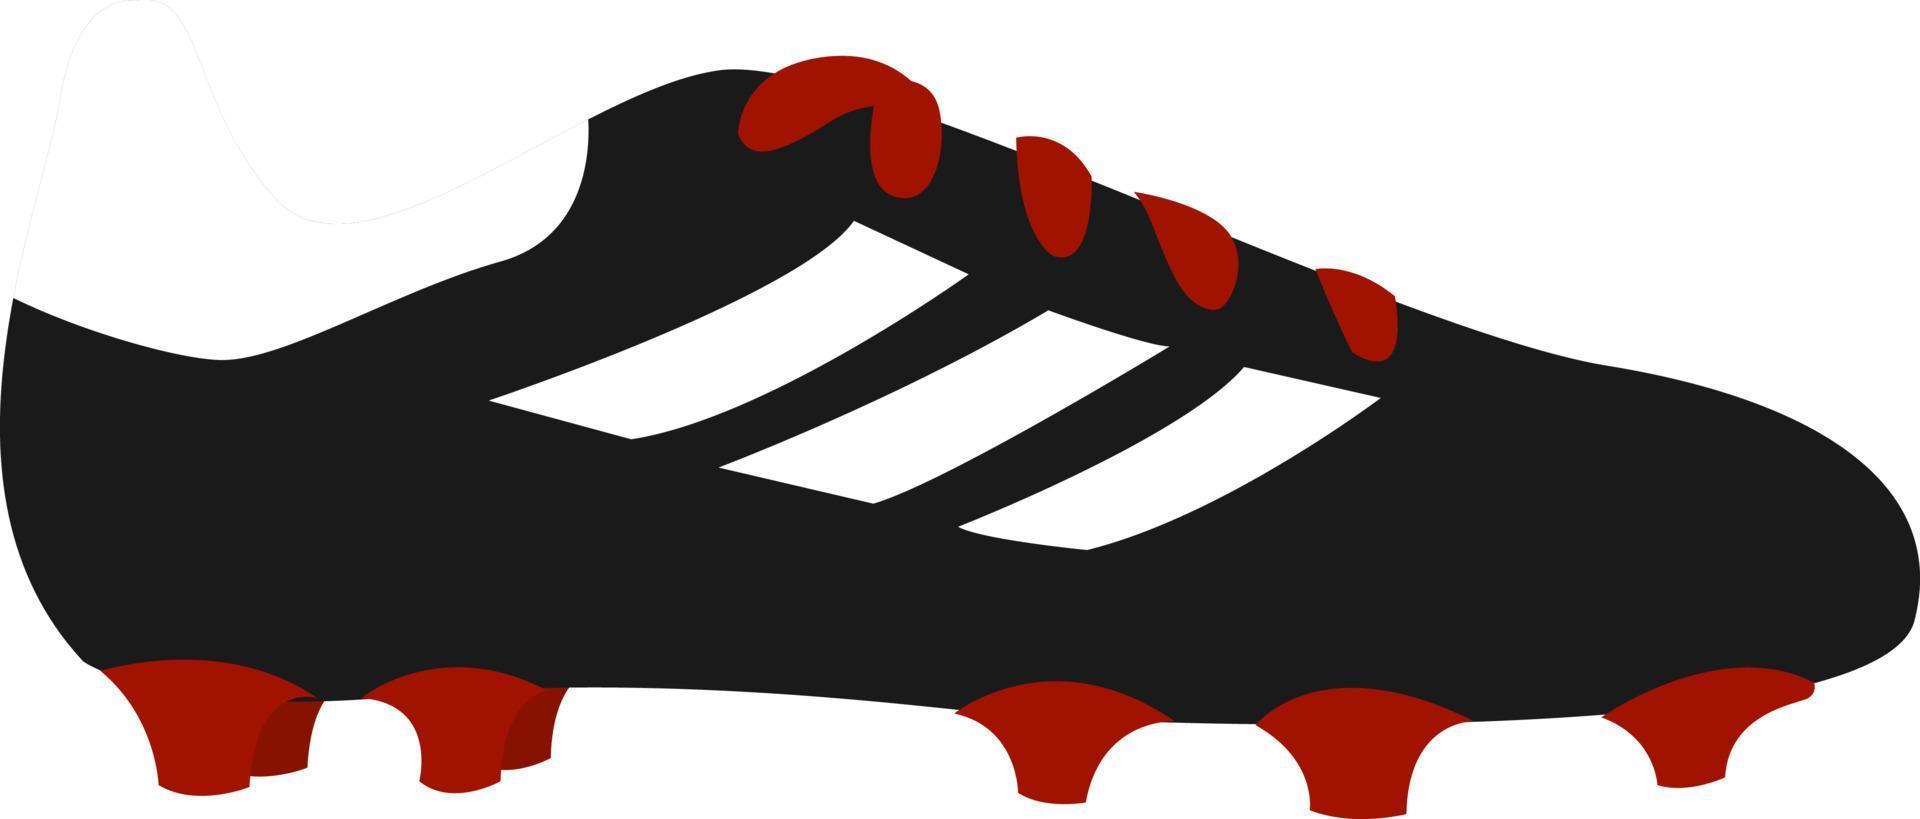 Football cleats, illustration, vector on white background.